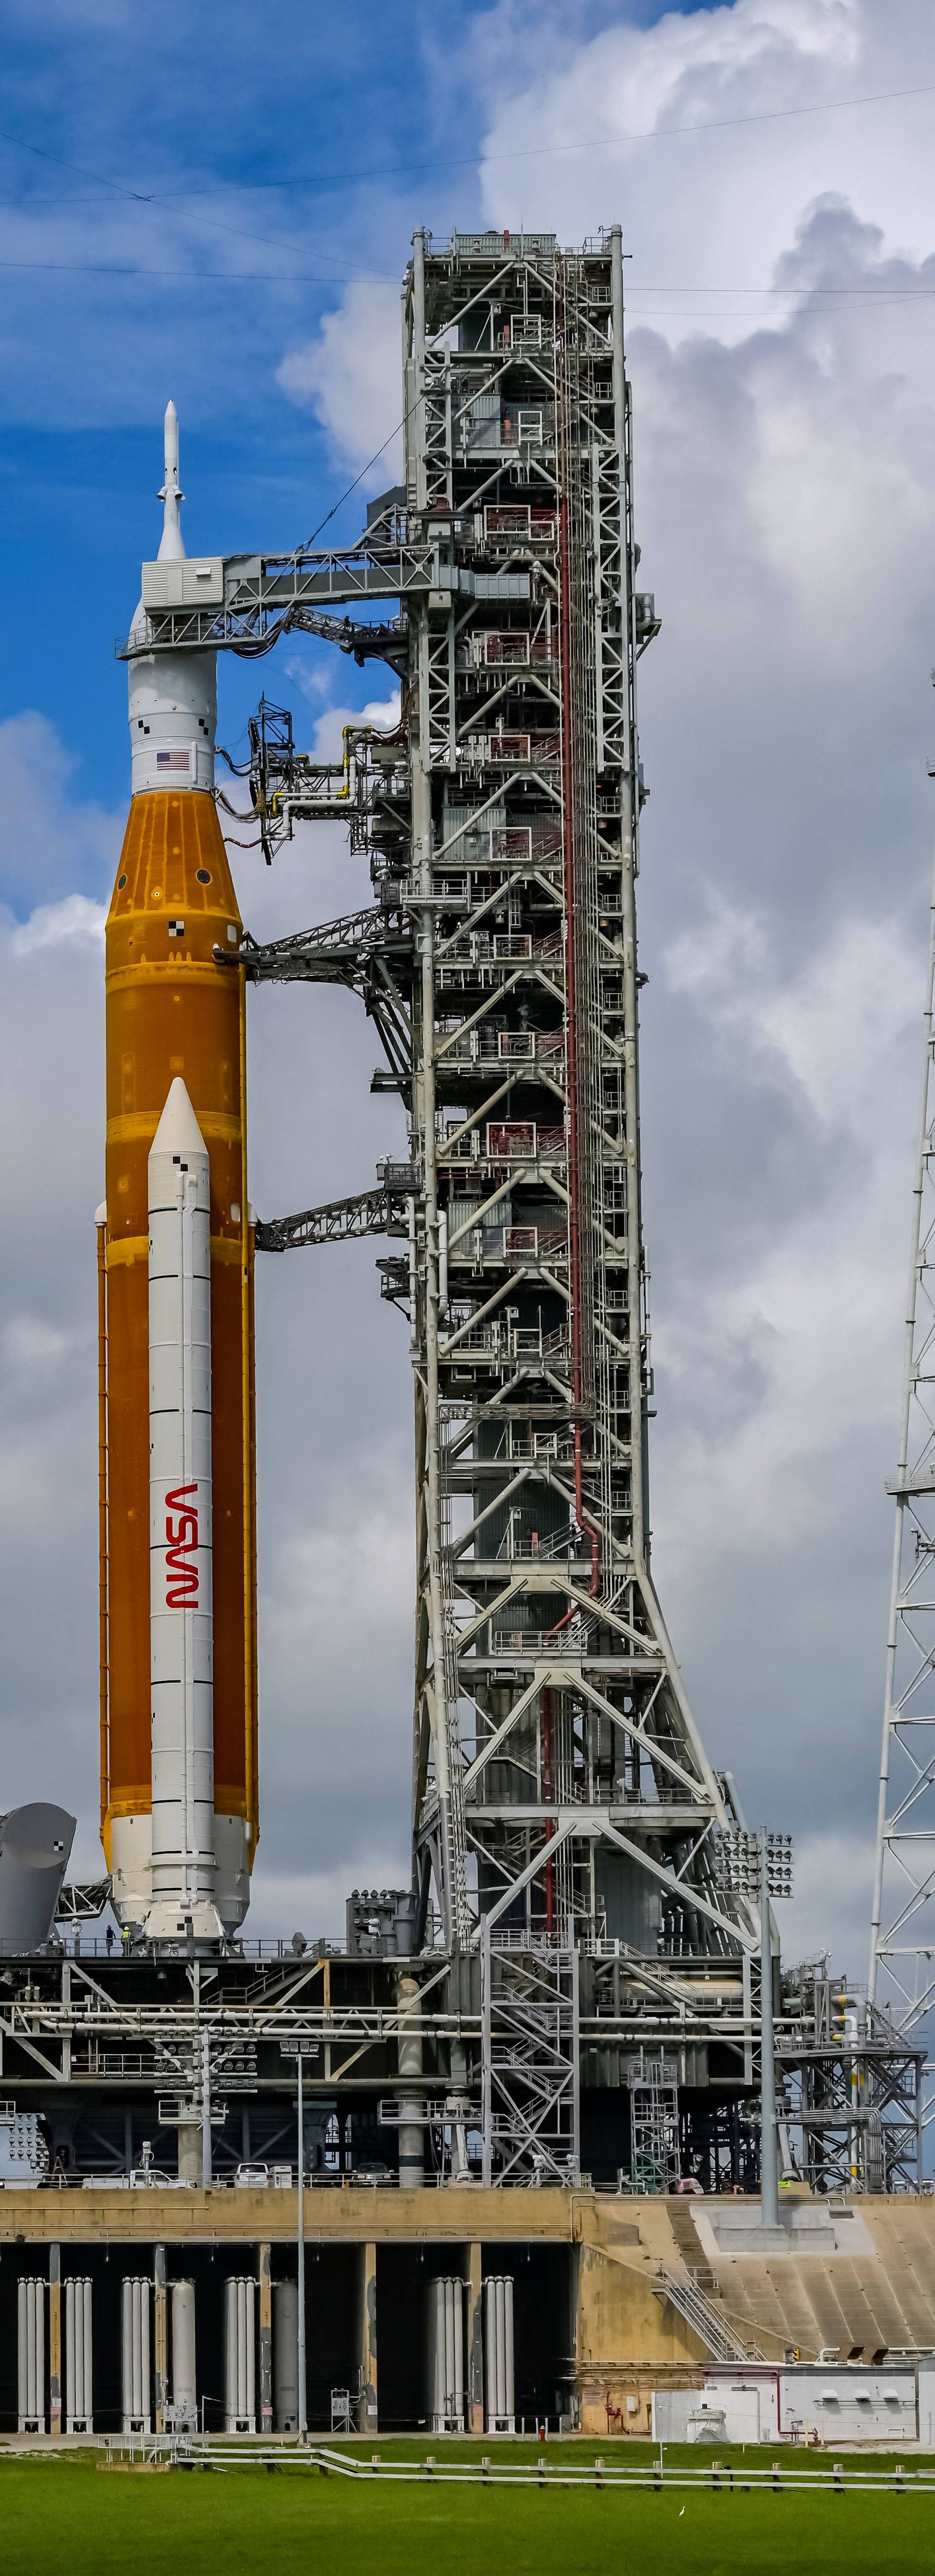 NASA's next-generation moon rocket, the Space Launch System rocket with its Orion crew capsule perched on top, stands on launch pad 39B in preparation for the Artemis 1 mission